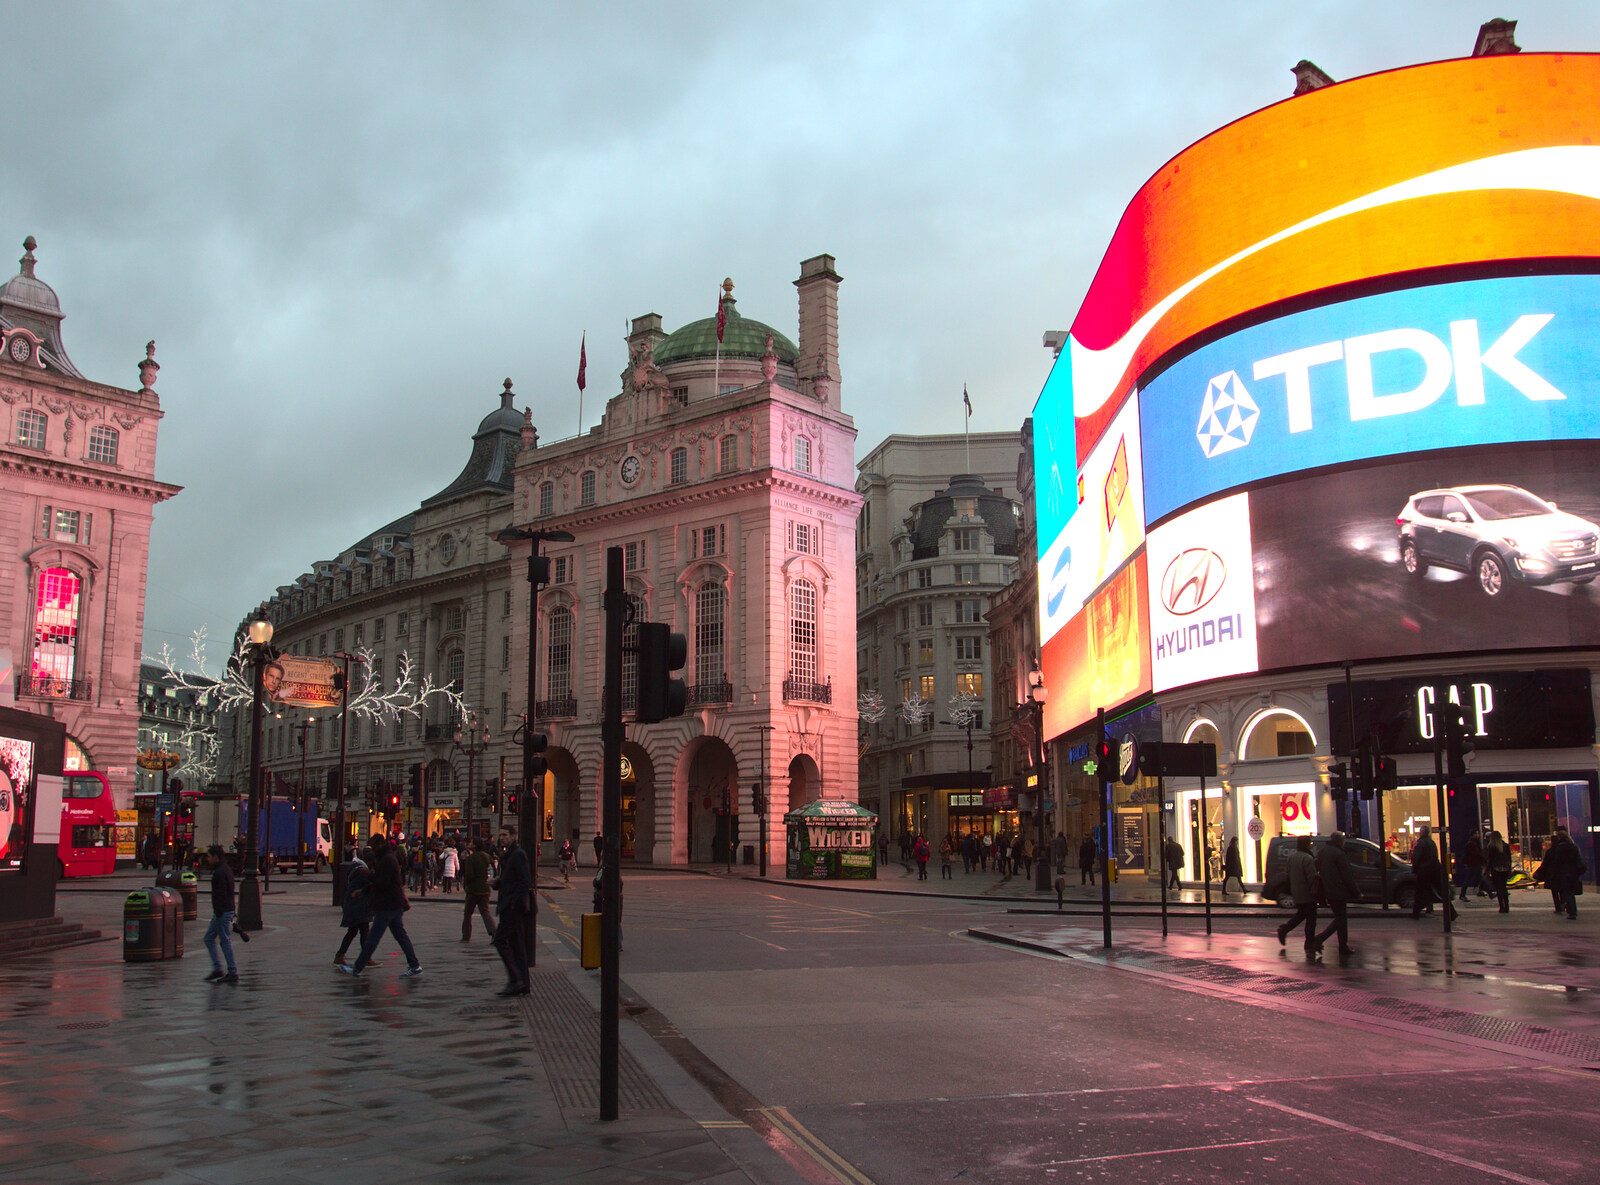 Early morning in Picadilly Circus from SwiftKey Innovation Nights, Westminster, London - 19th December 2014